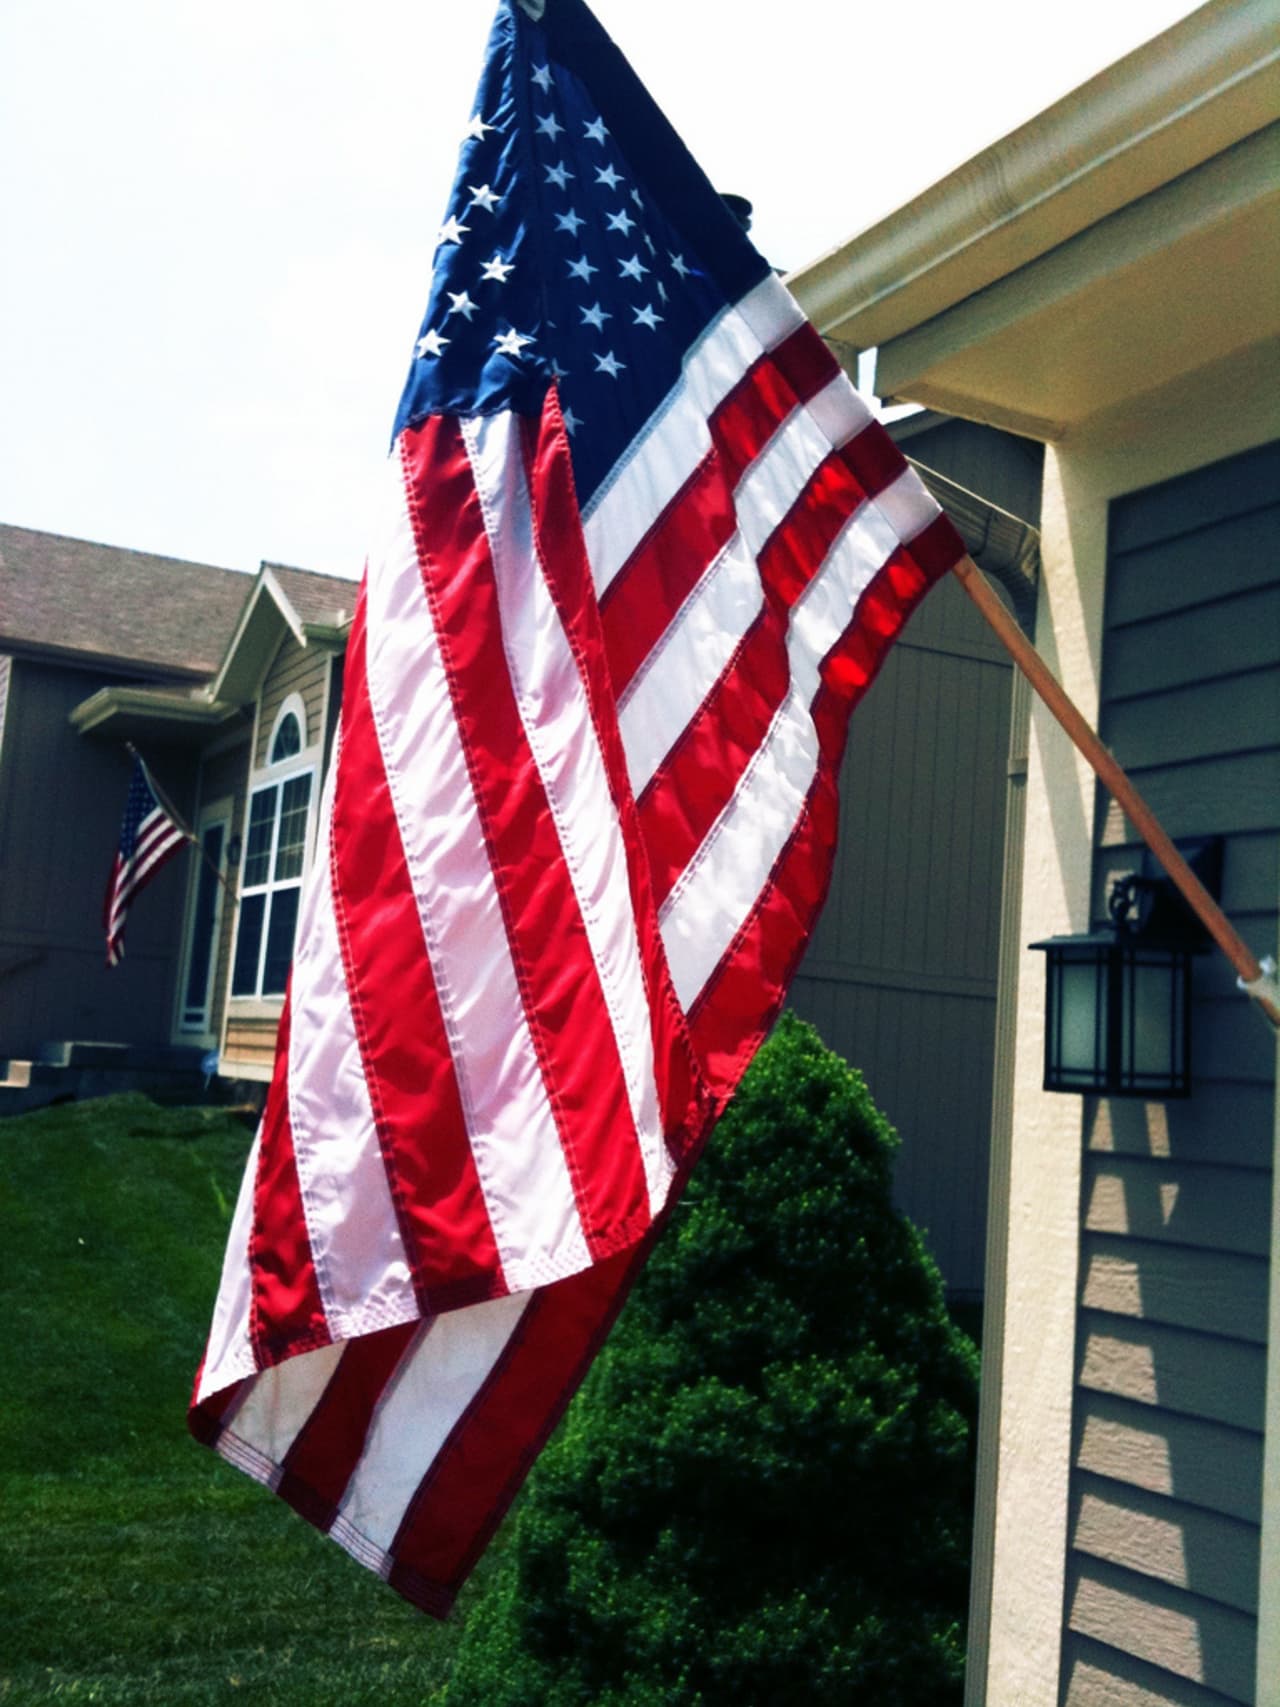 This year's Flag Day falls on Friday, June 14.